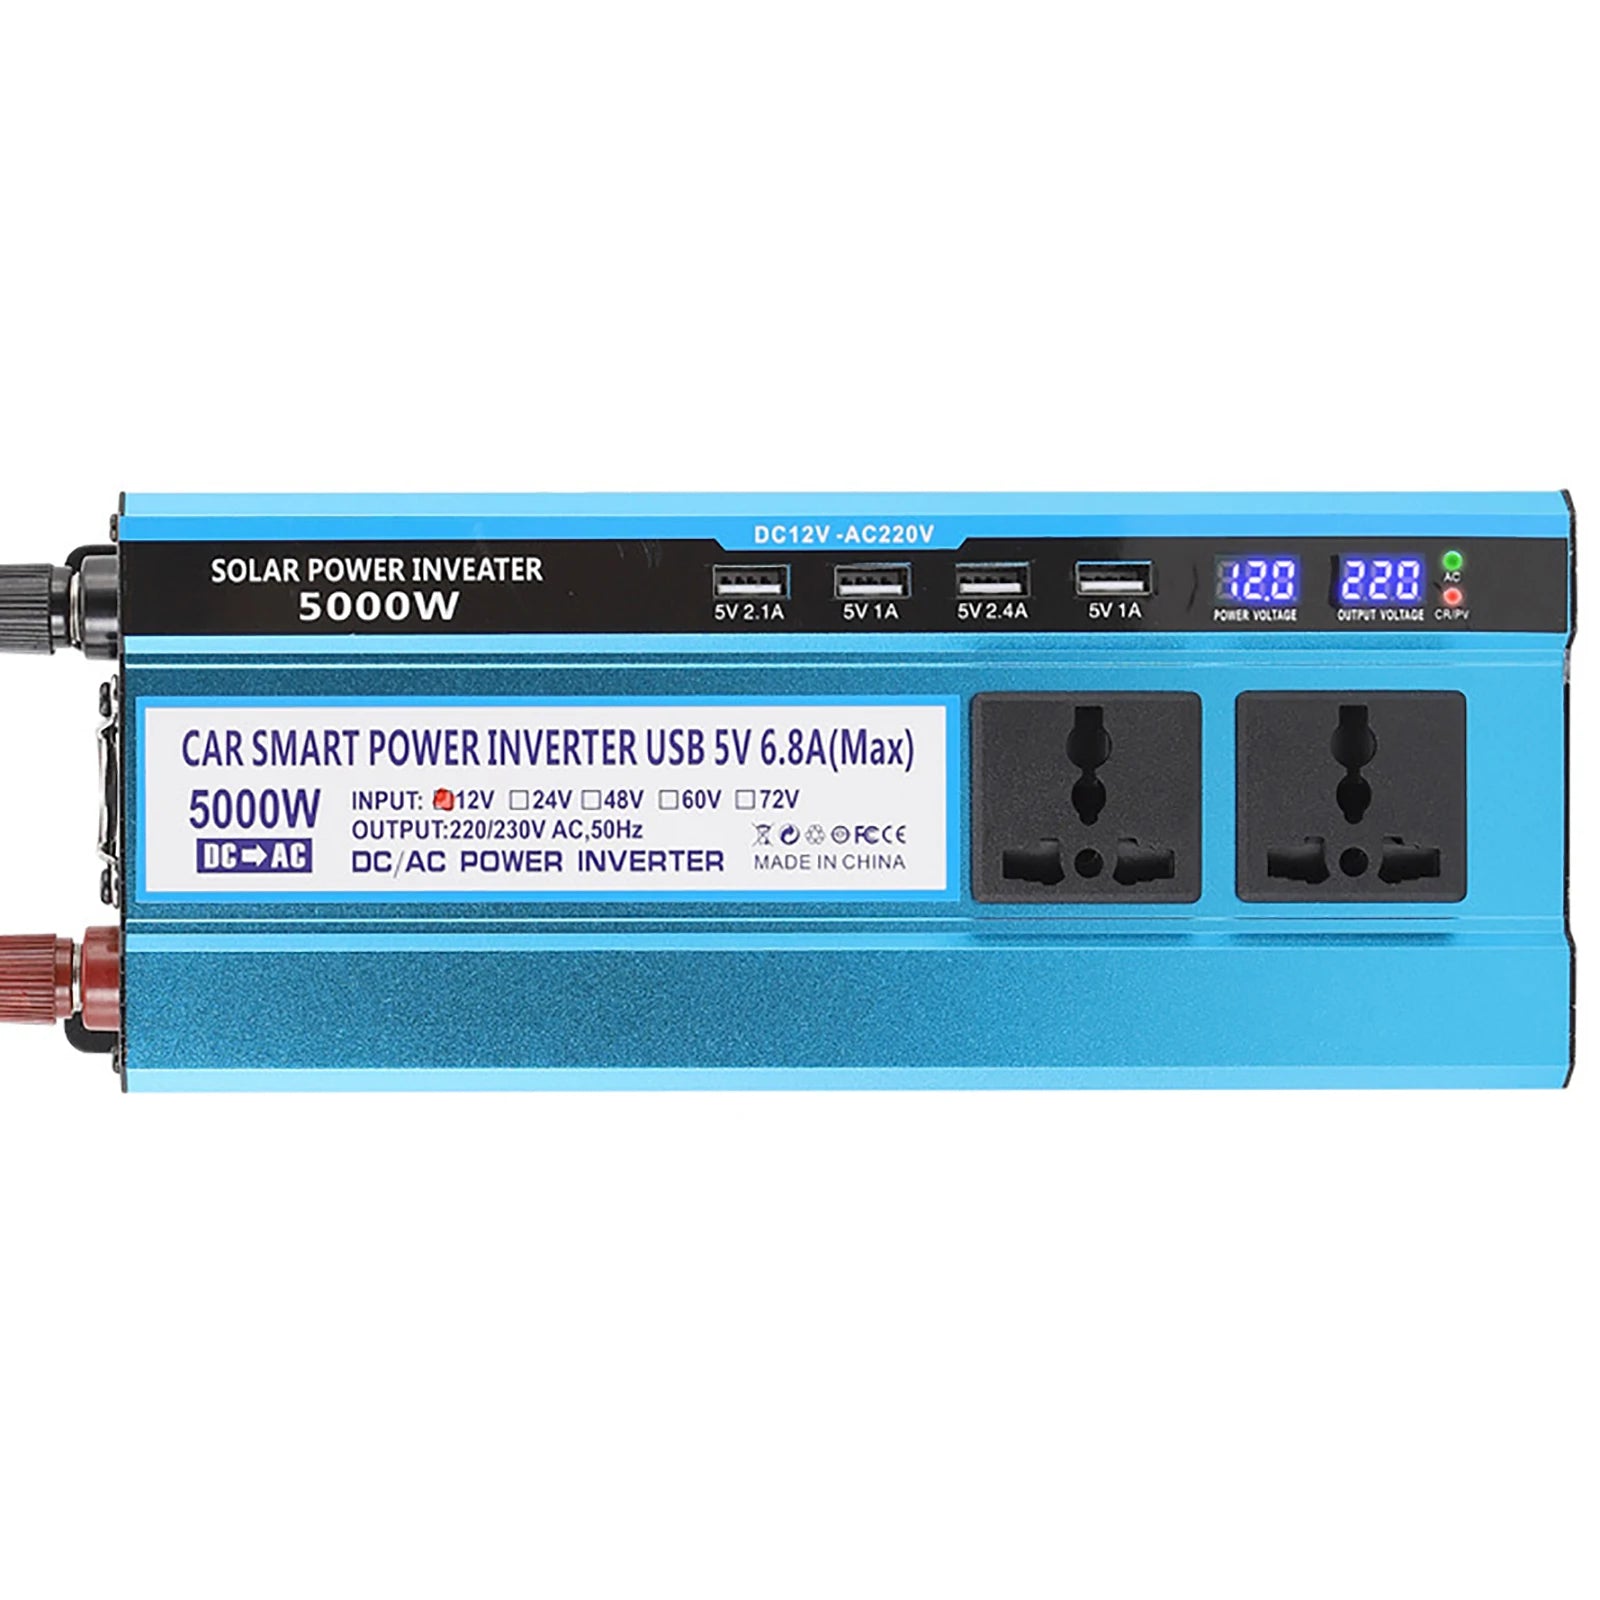 Modified sine wave power inverter for solar panels and cars, converting DC to AC.